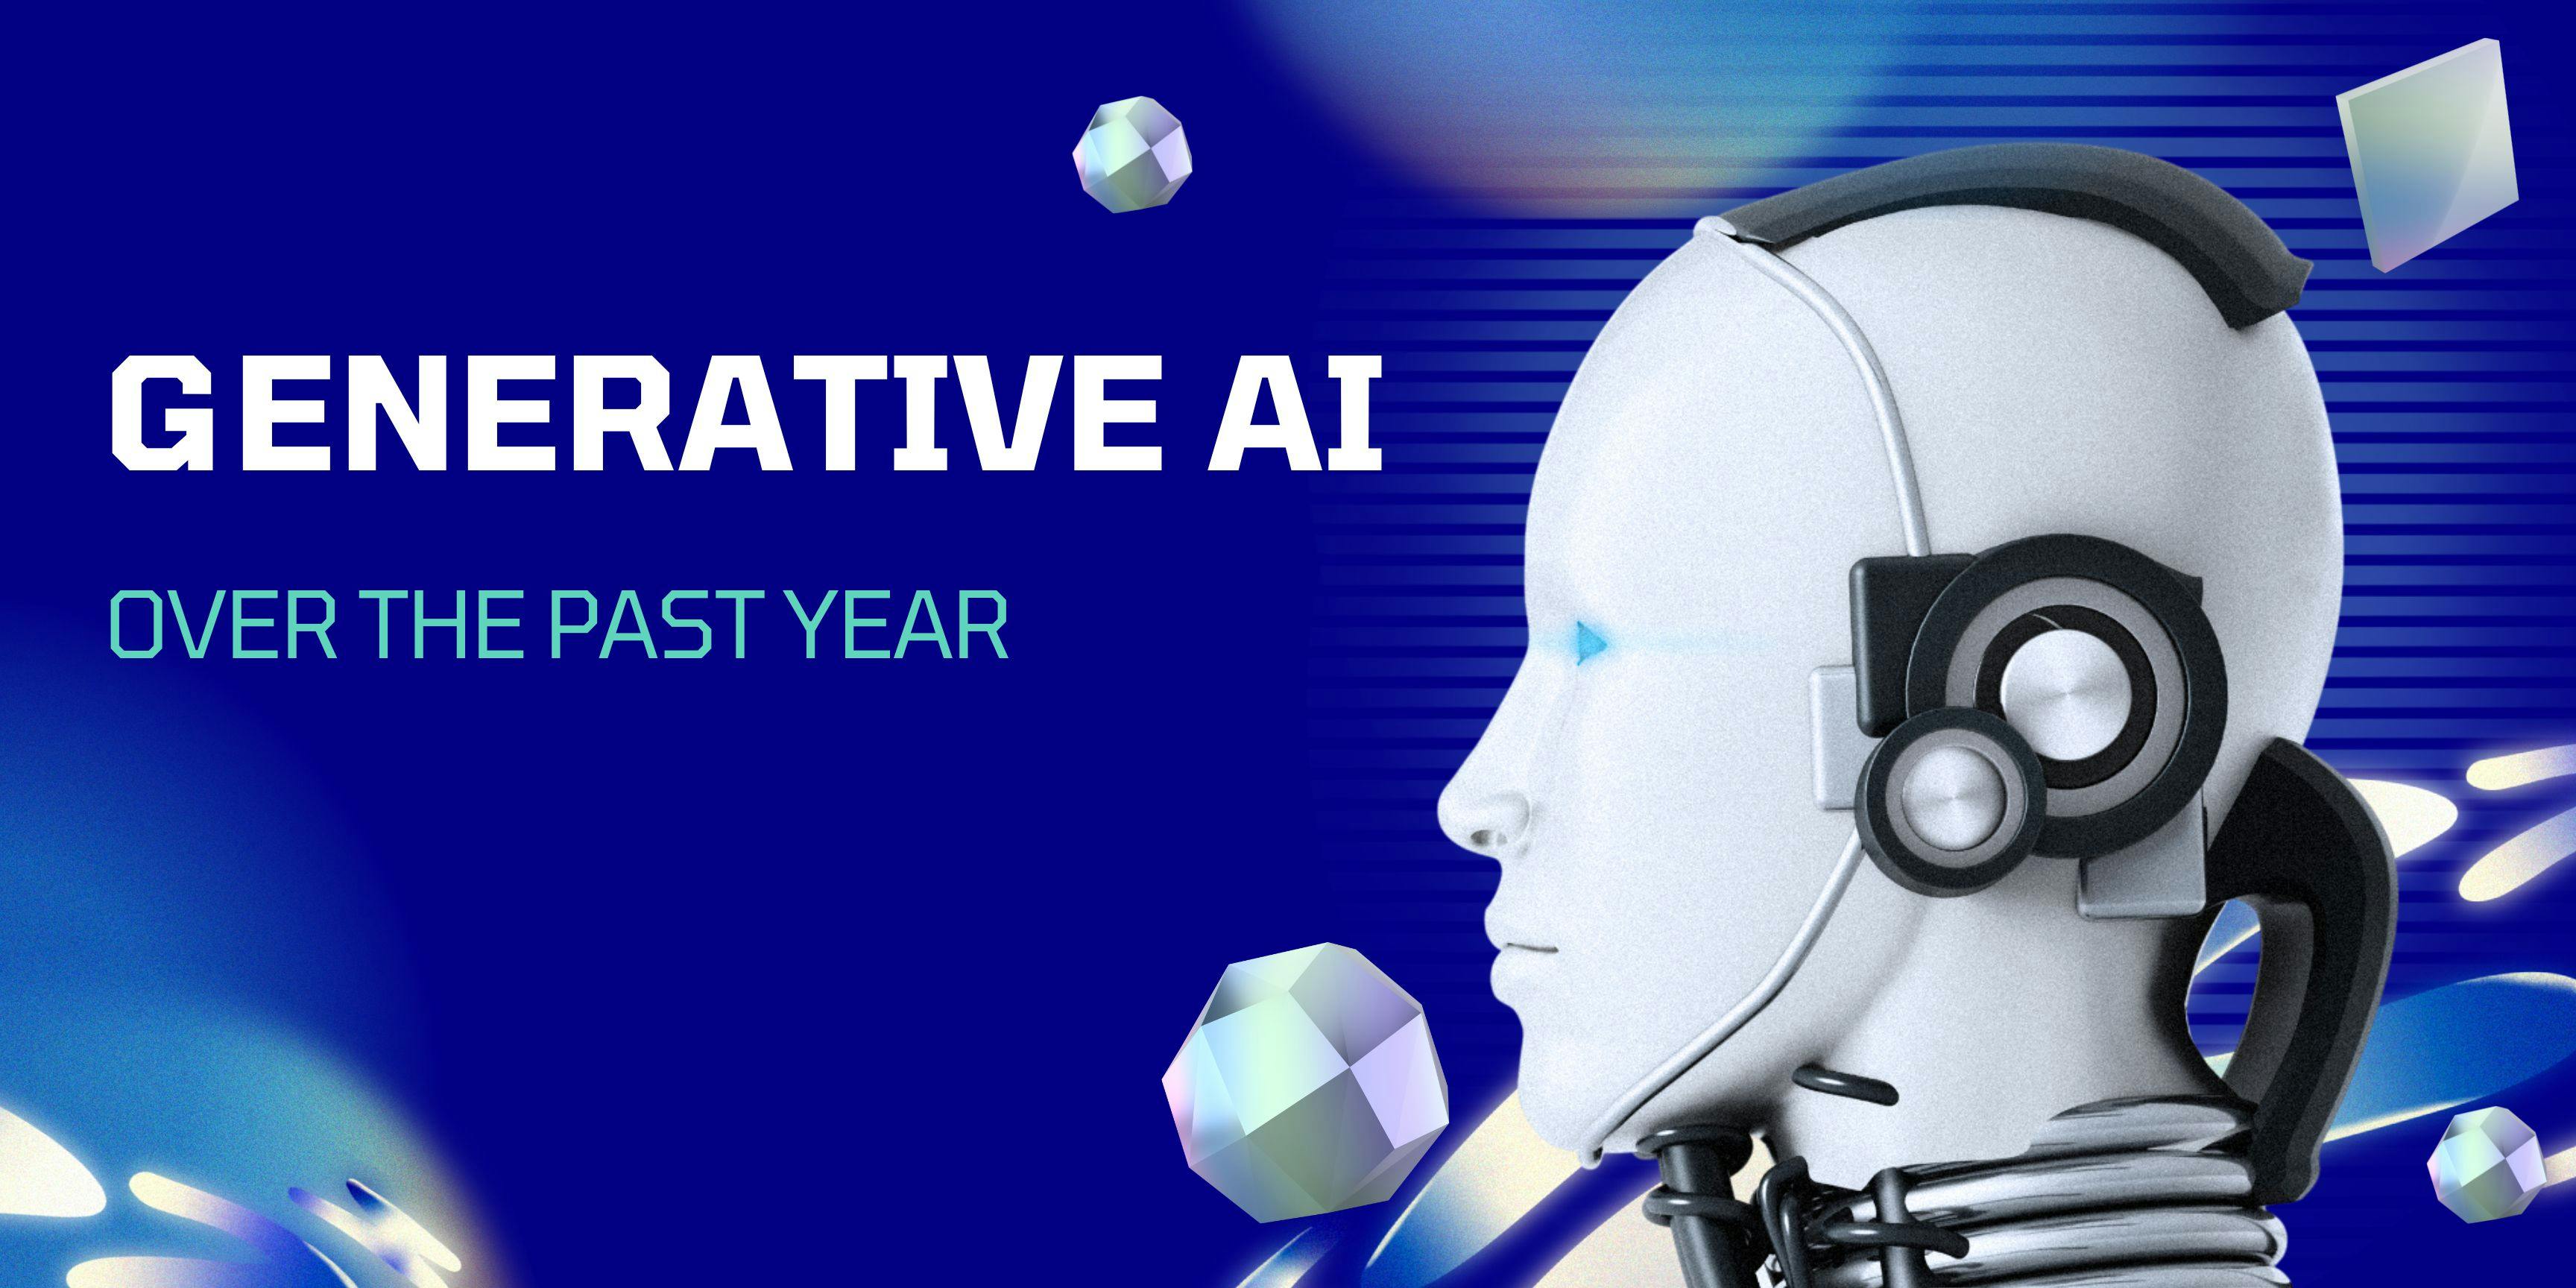 Cover Image for Generative AI over the past year